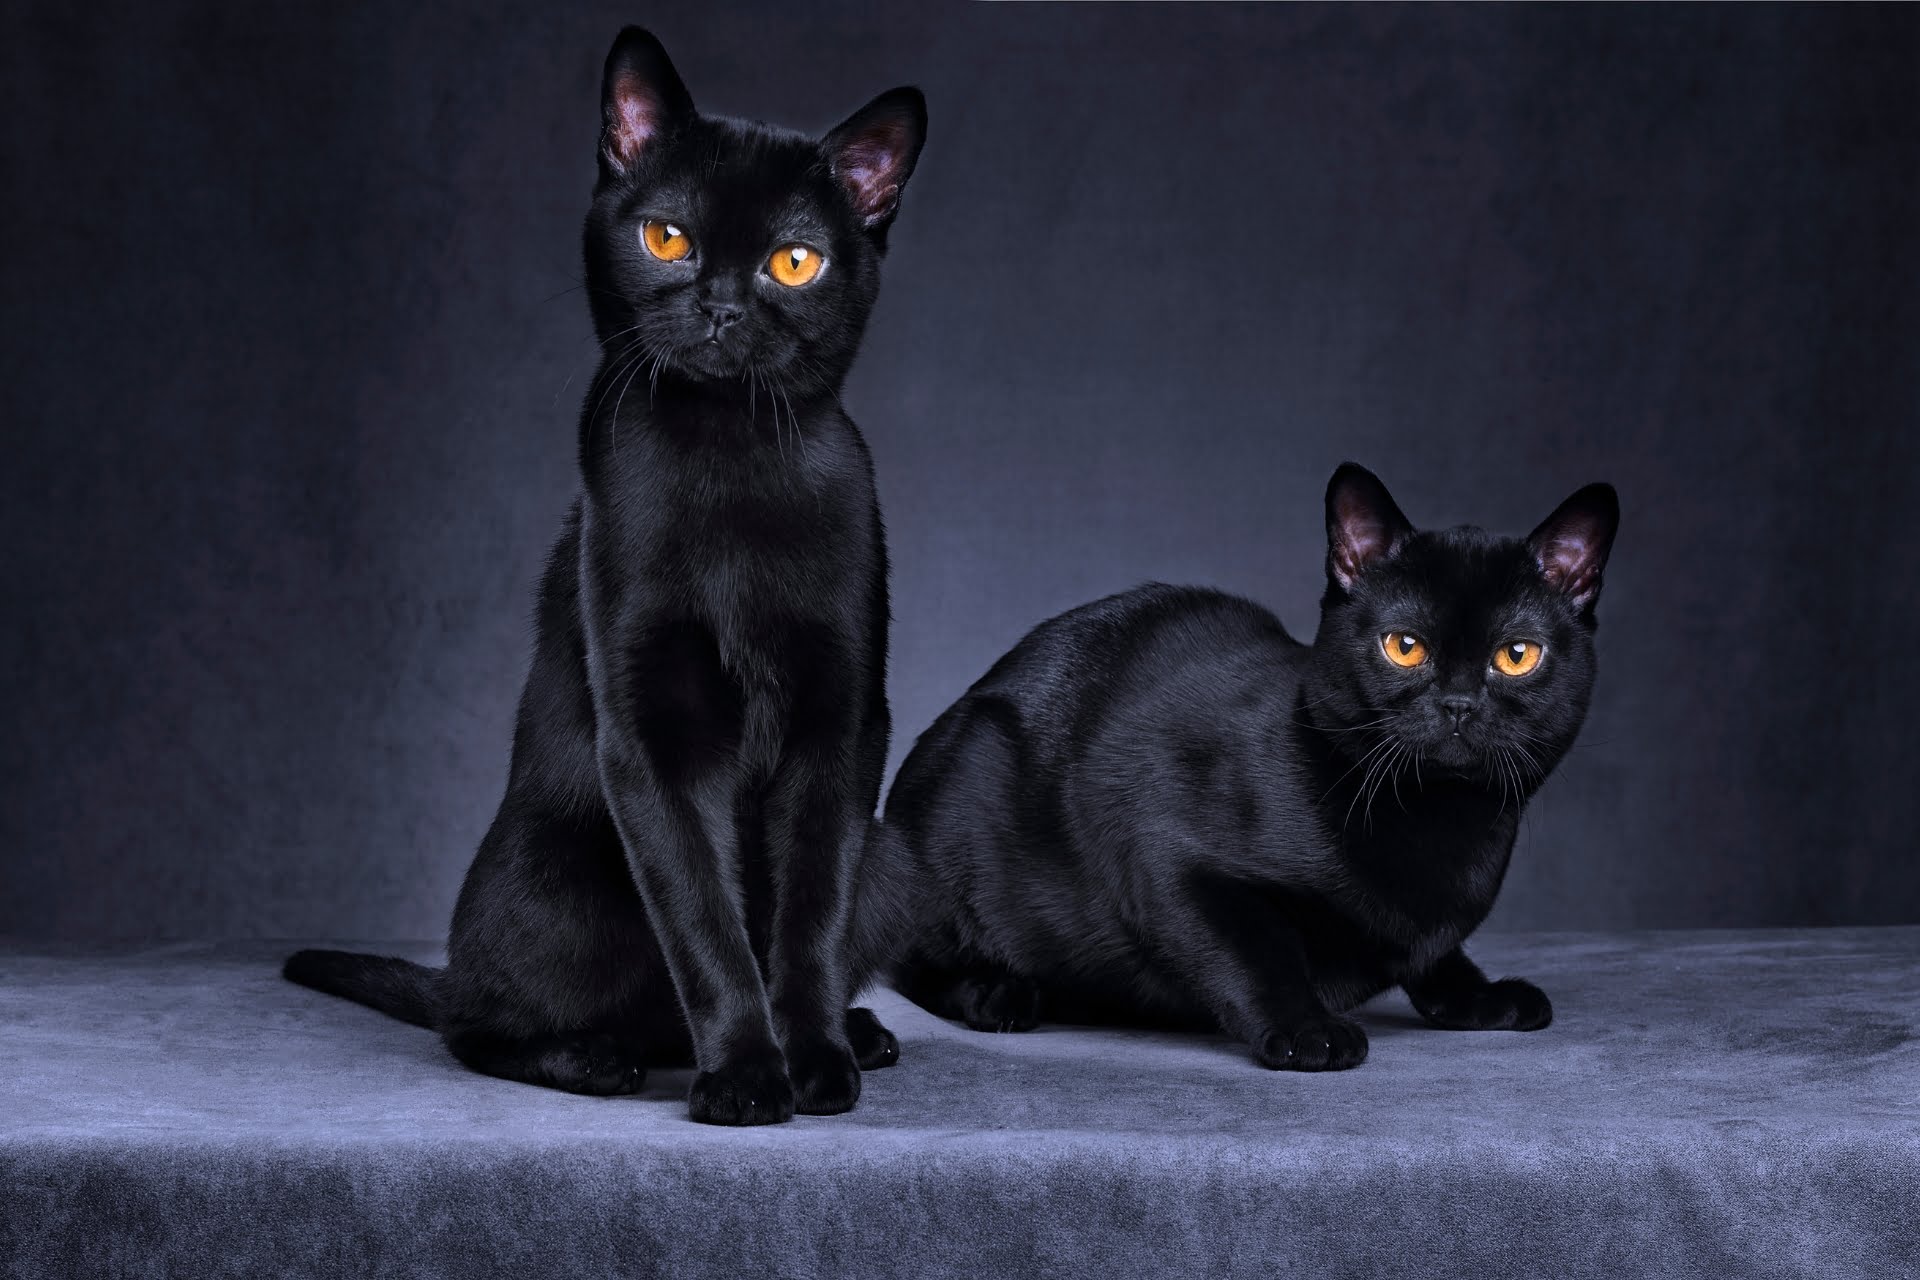 What Breeds of Cats Are Black? 17 Black Cat Breeds